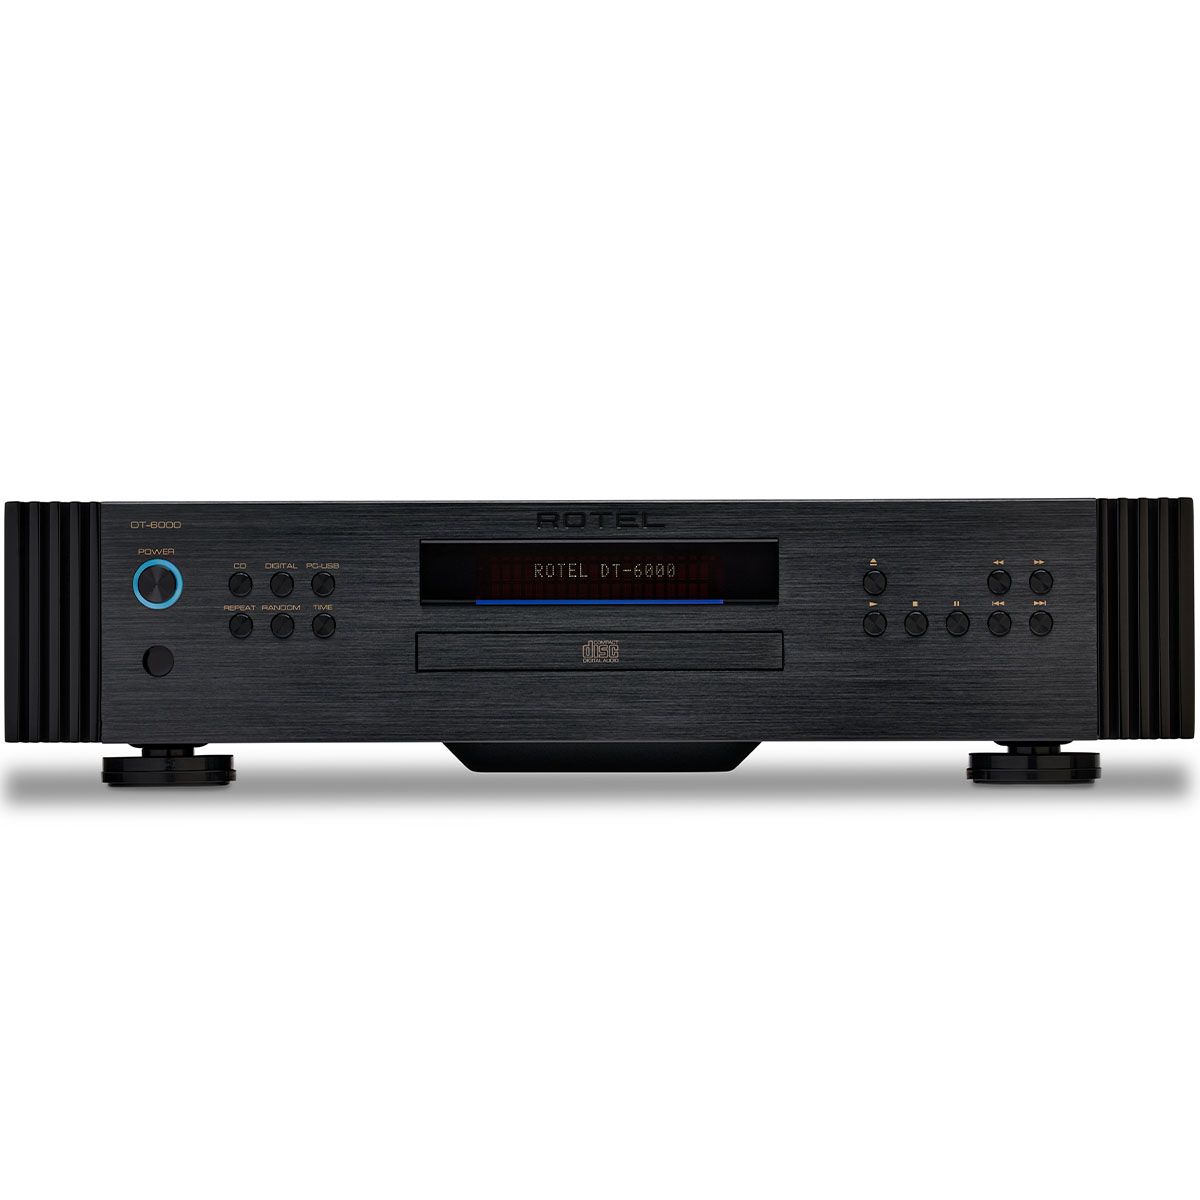 Rotel DT-6000 DAC/CD Transport - Black - front view